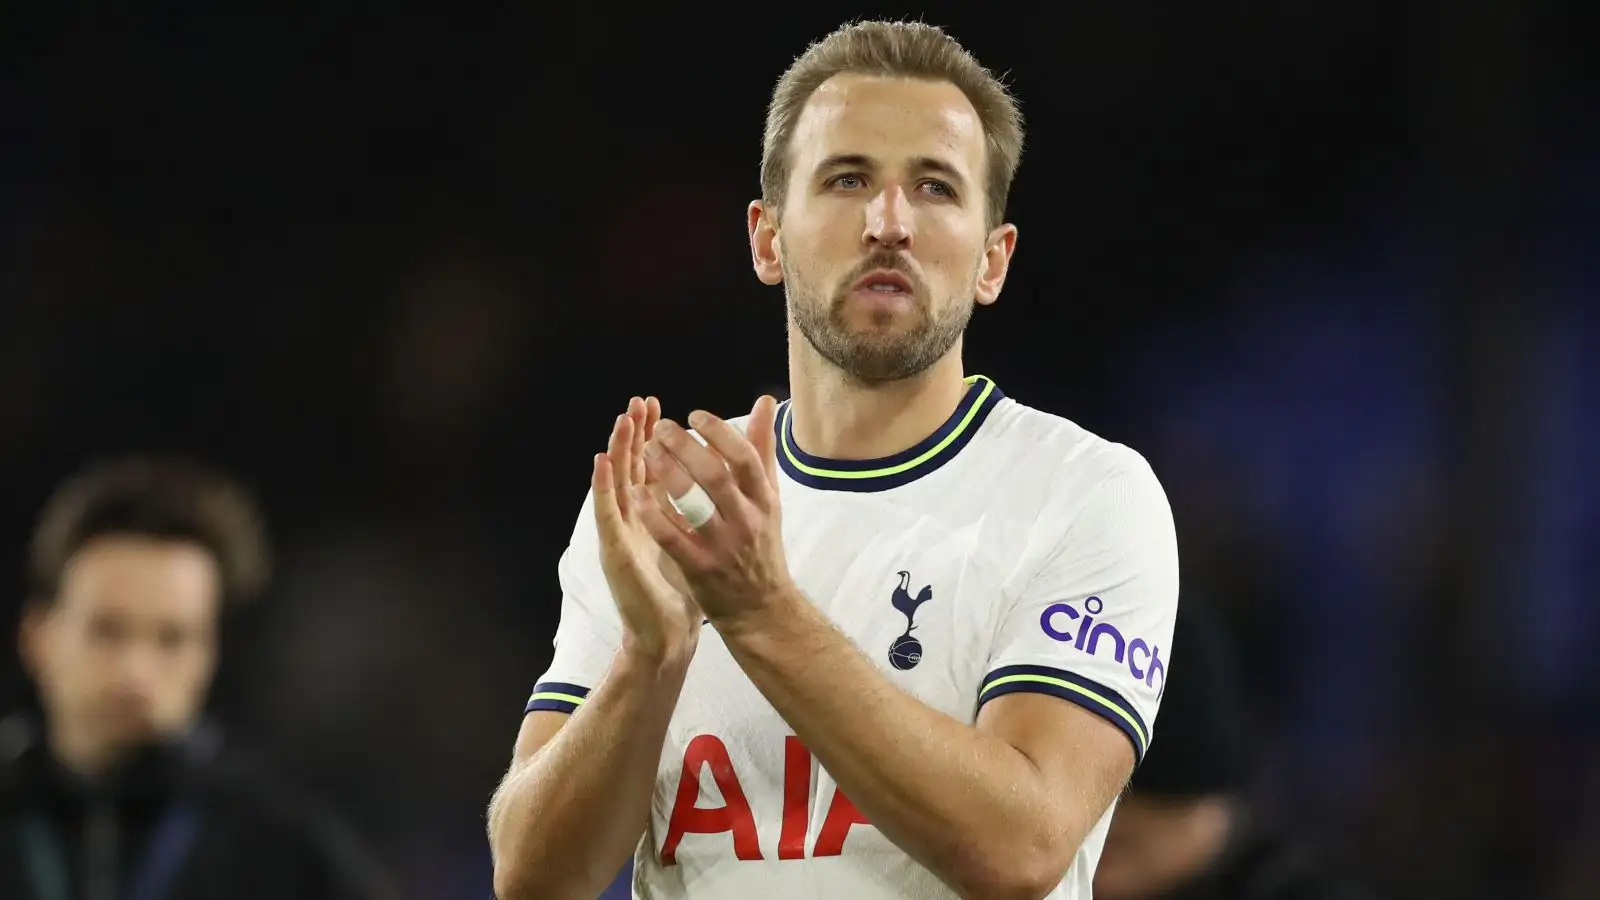 Man Utd told Kane ‘could be forced out’ of Tottenham and £100m target has ‘big decision’ to make